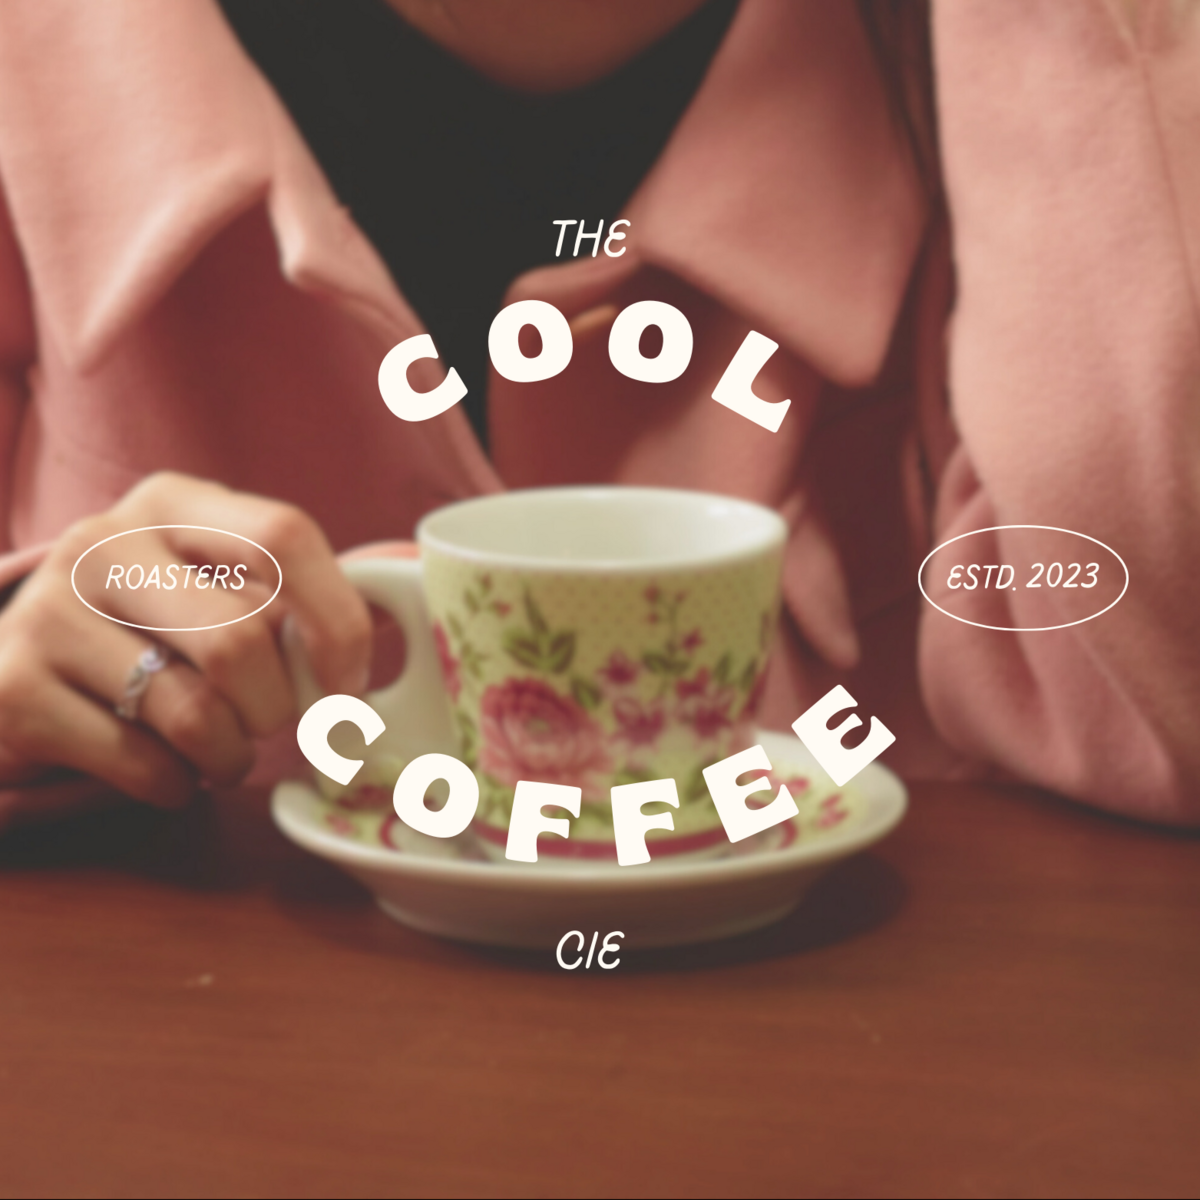 The Cool Coffee Cie canva brand identity for a cool and groovy coffee shop